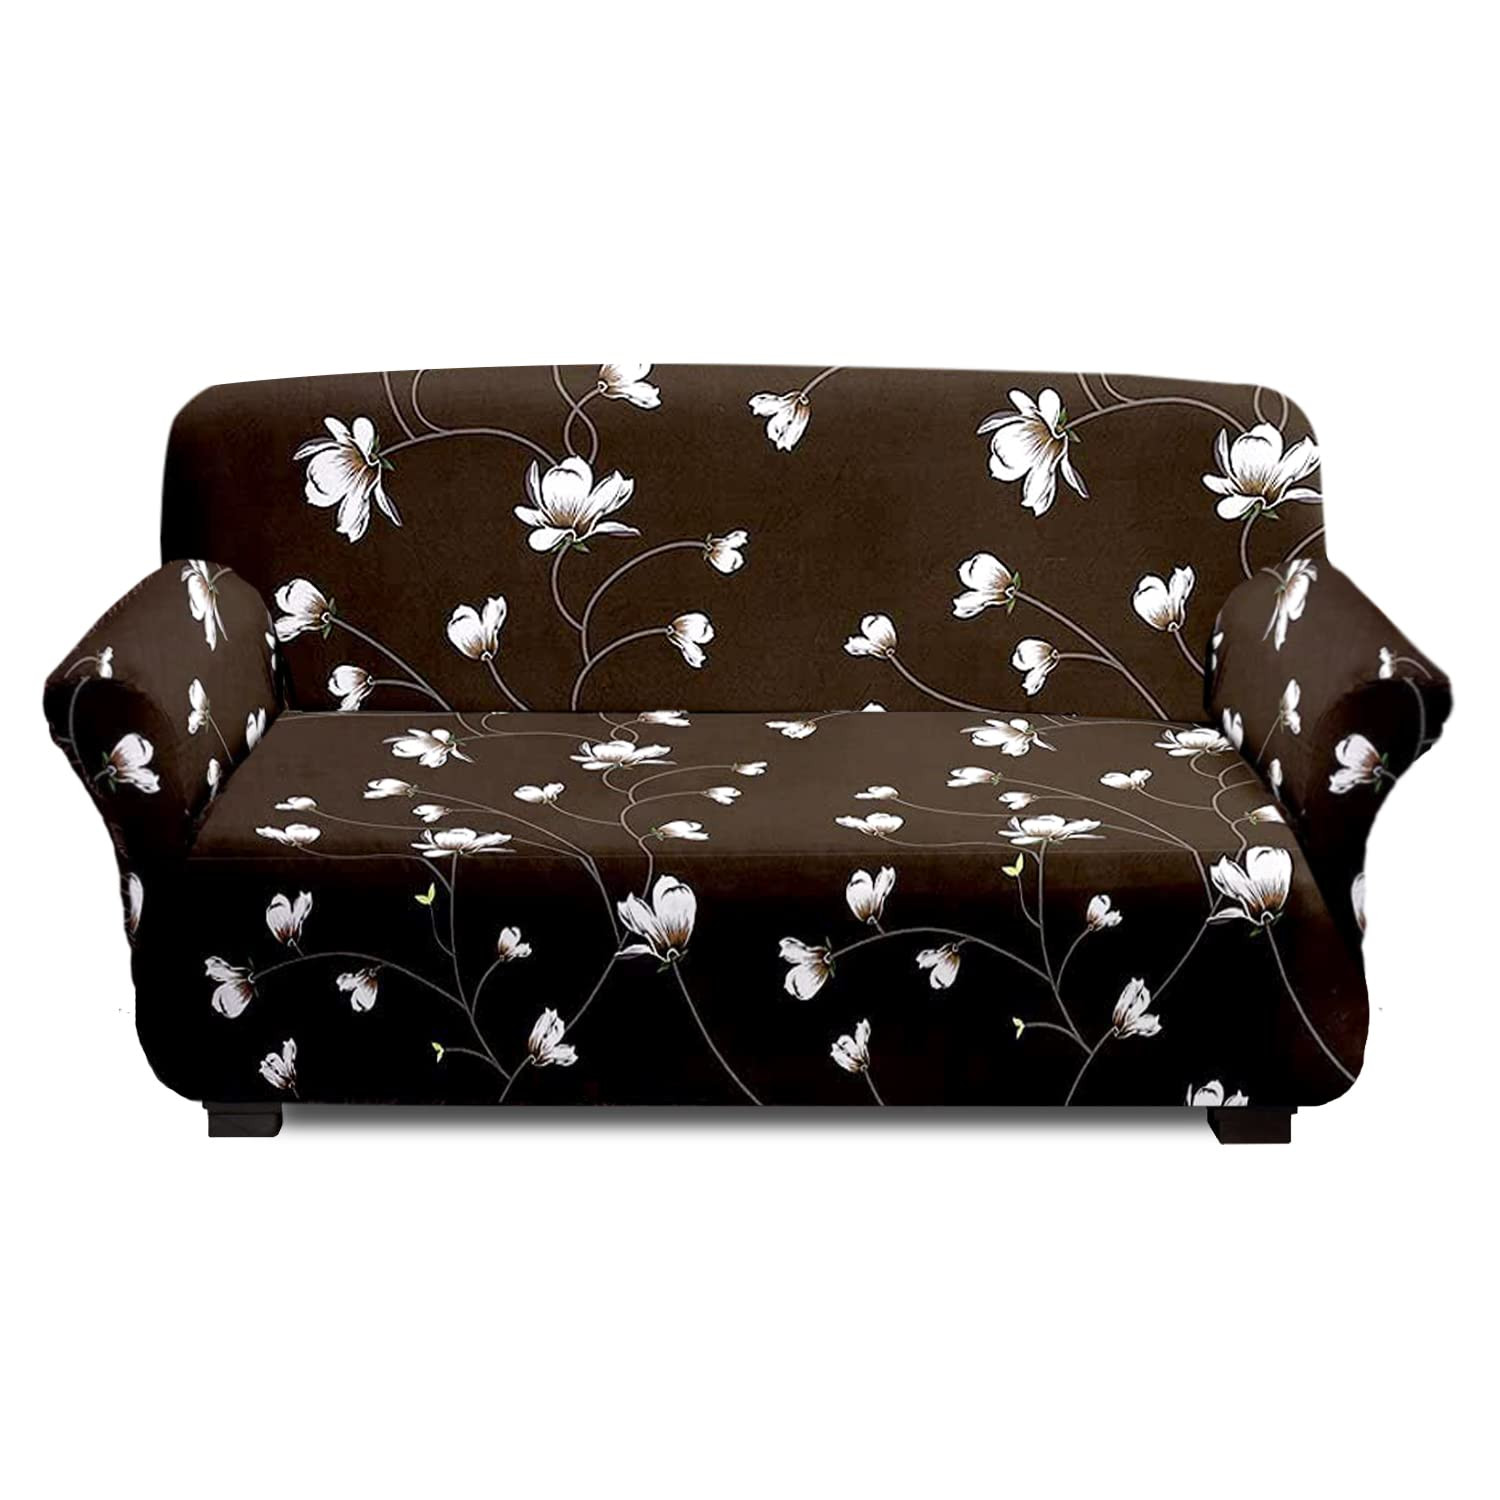 Kuber Industries Premium Two-Seater Comfort Sofa Cover|Polyester Floral Print Couch Cover|Stretchy Sofa Slipcovers With Foam Sticks (Brown)